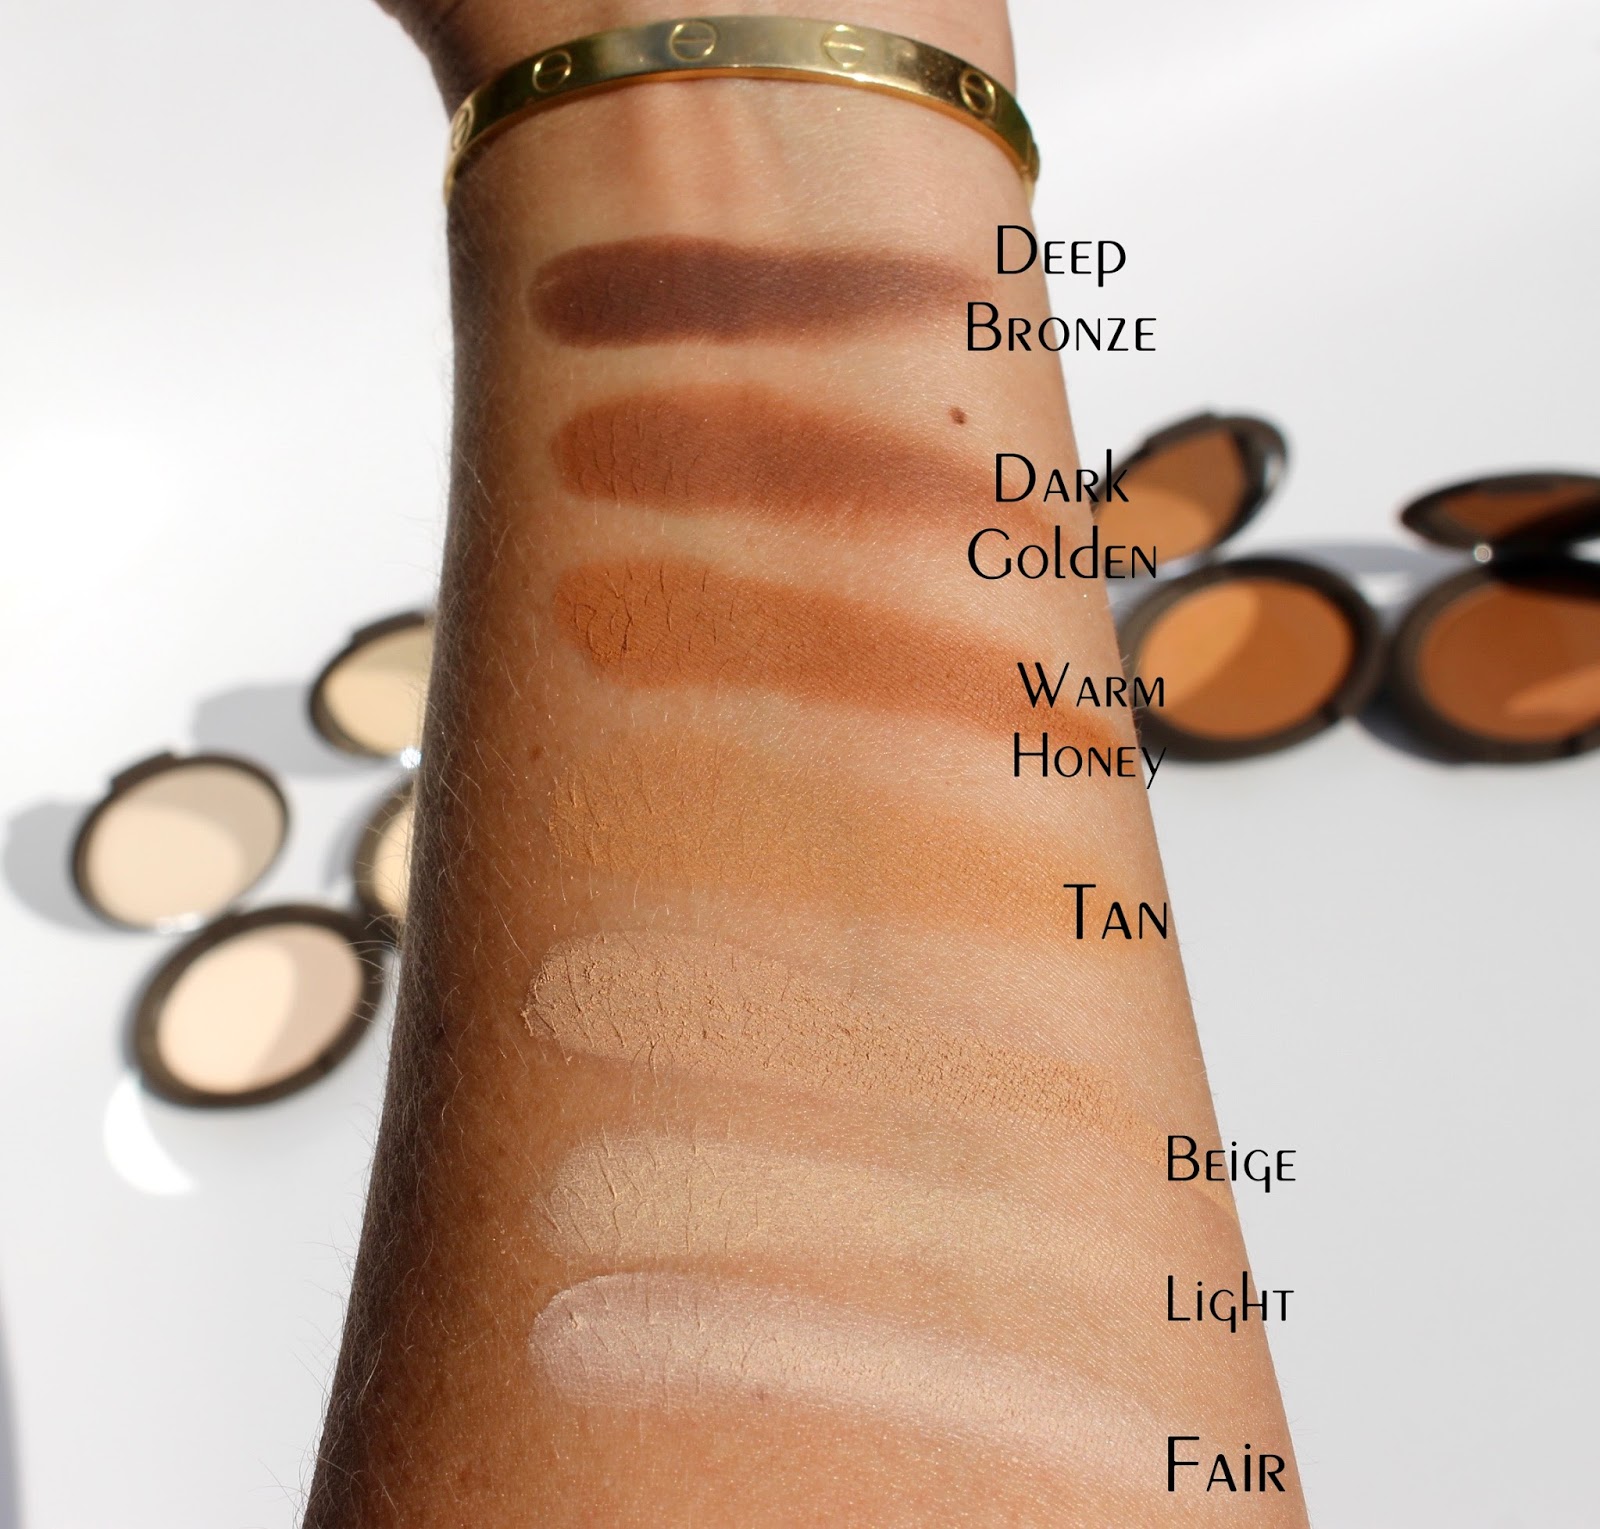 Swatches in direct sunlight. 